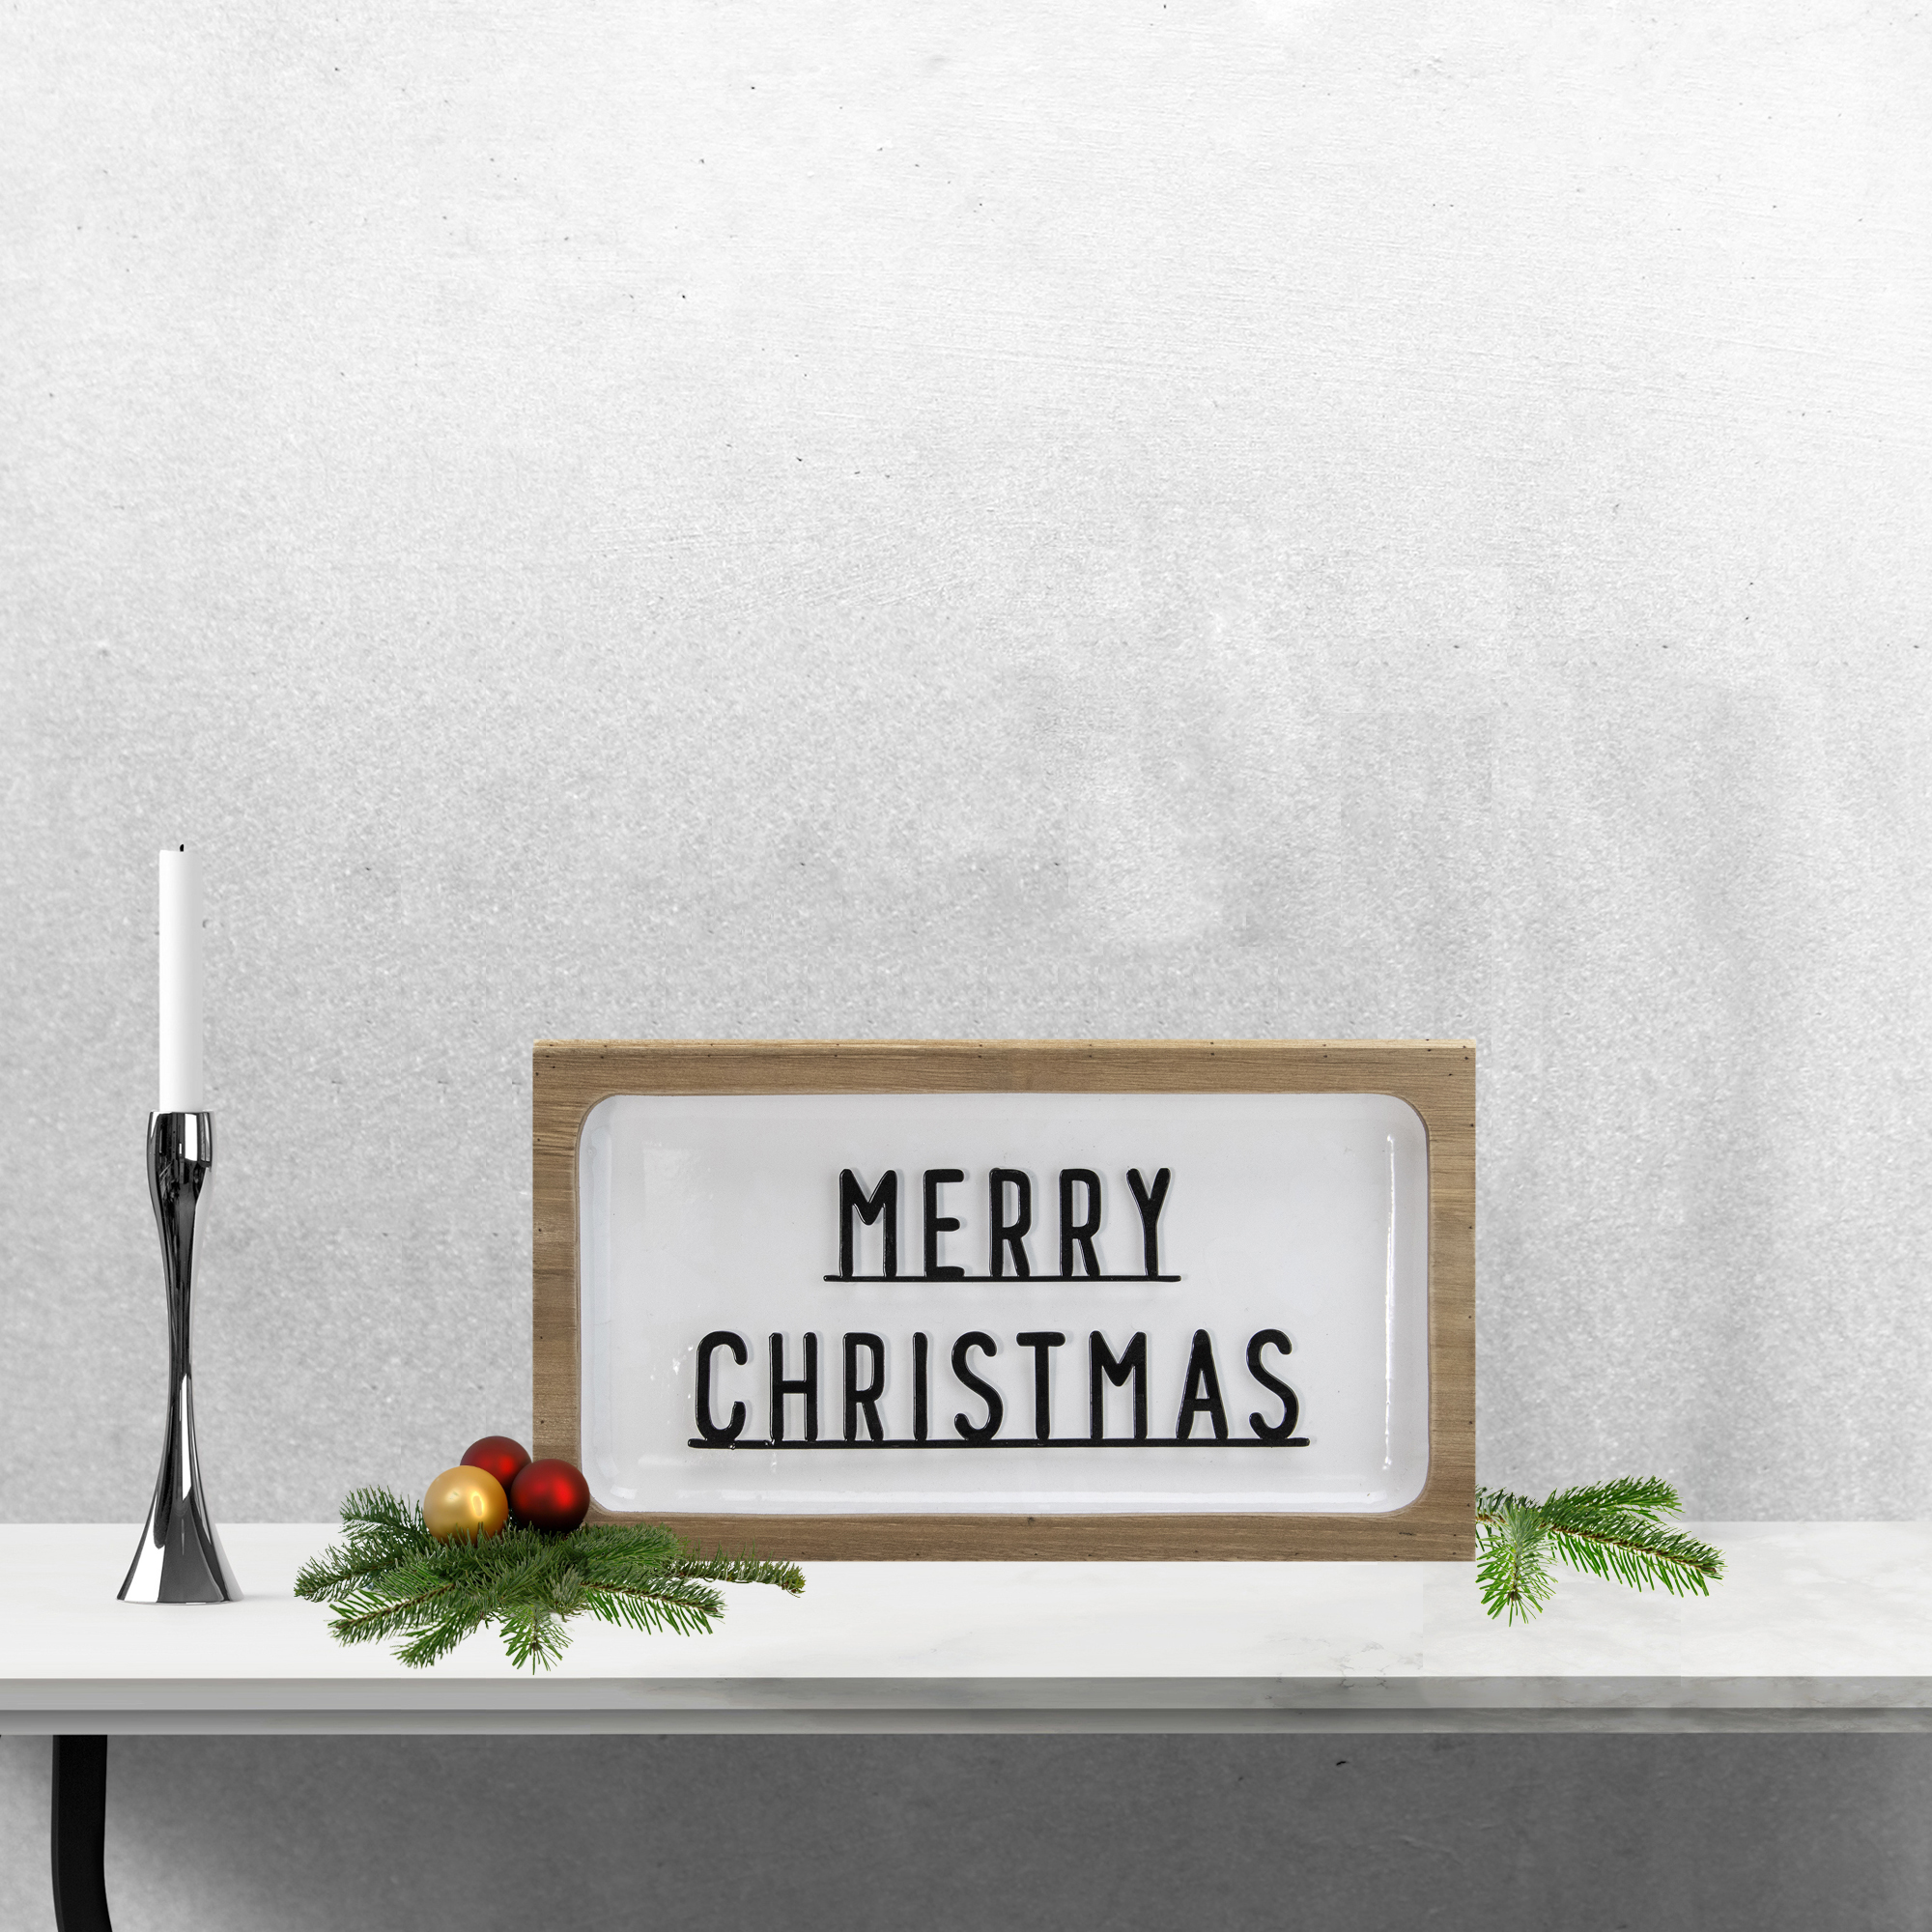 Northlight 3D Wooden "Merry Christmas" Wall or Tabletop Decor - 13" - White and Brown